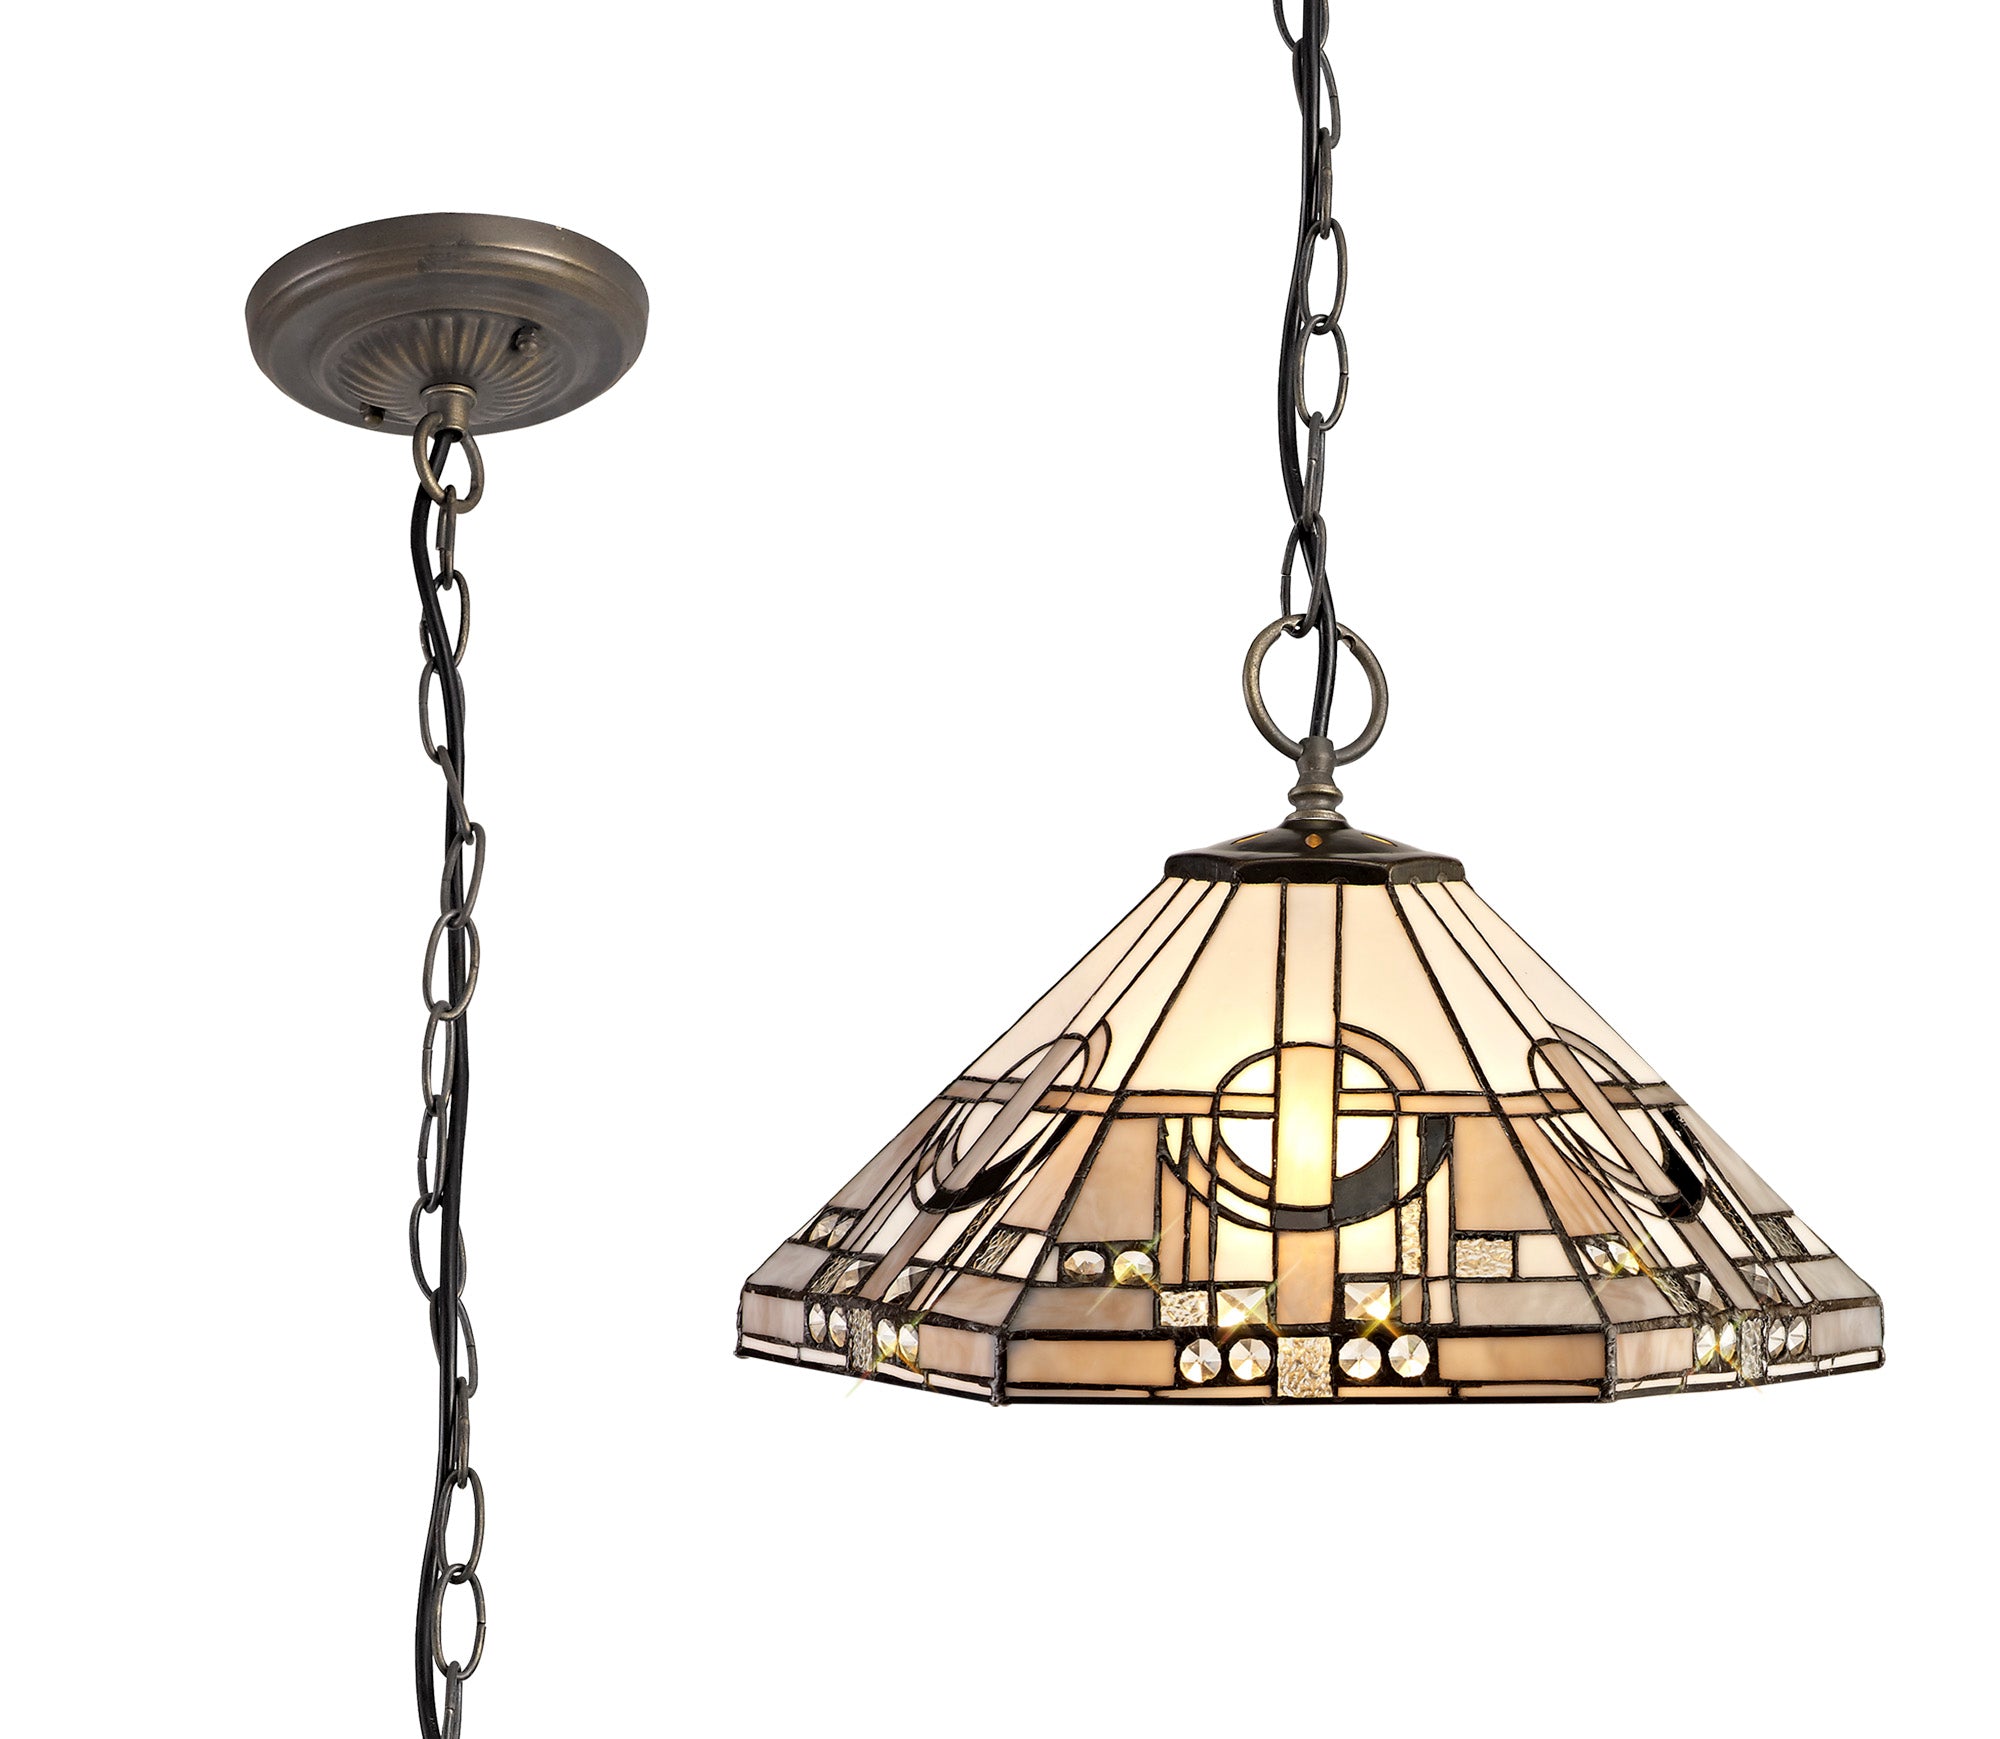 Atek 3 Light Downlighter Pendant E27 With 40cm Tiffany Shade, White/Grey/Black/Clear Crystal/Aged Antique Brass